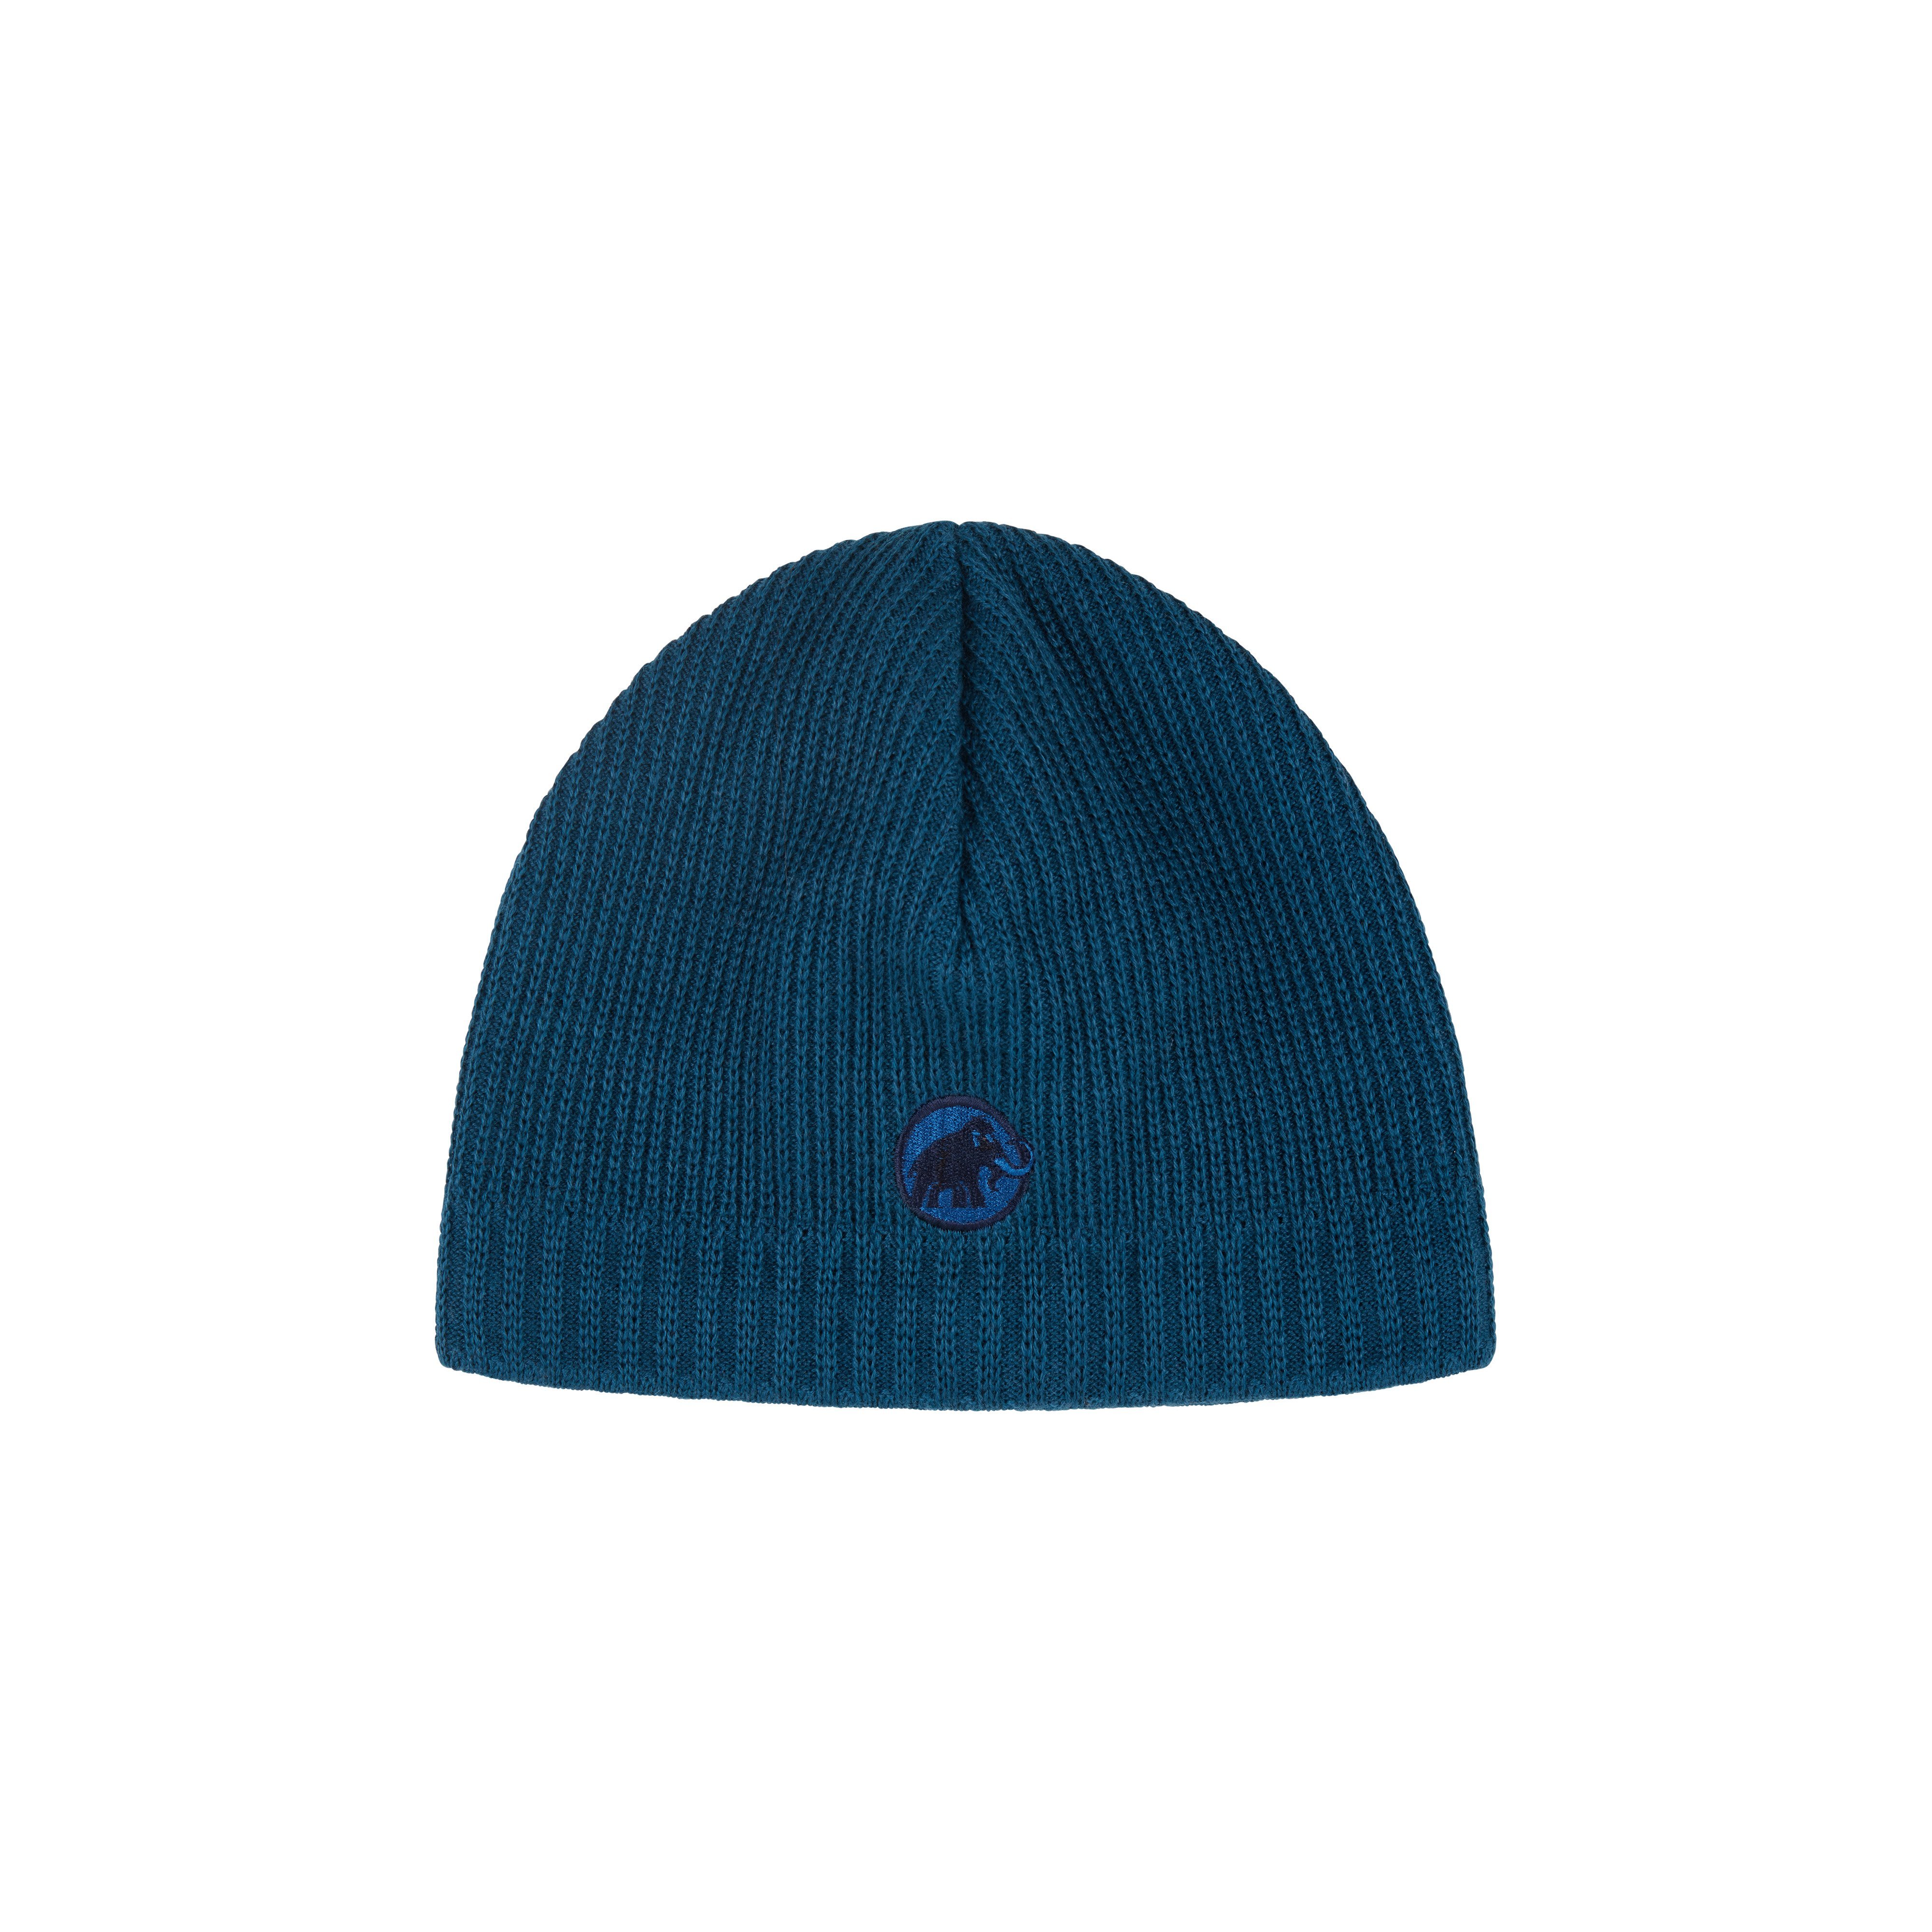 Sublime Beanie - deep ice, one size product image